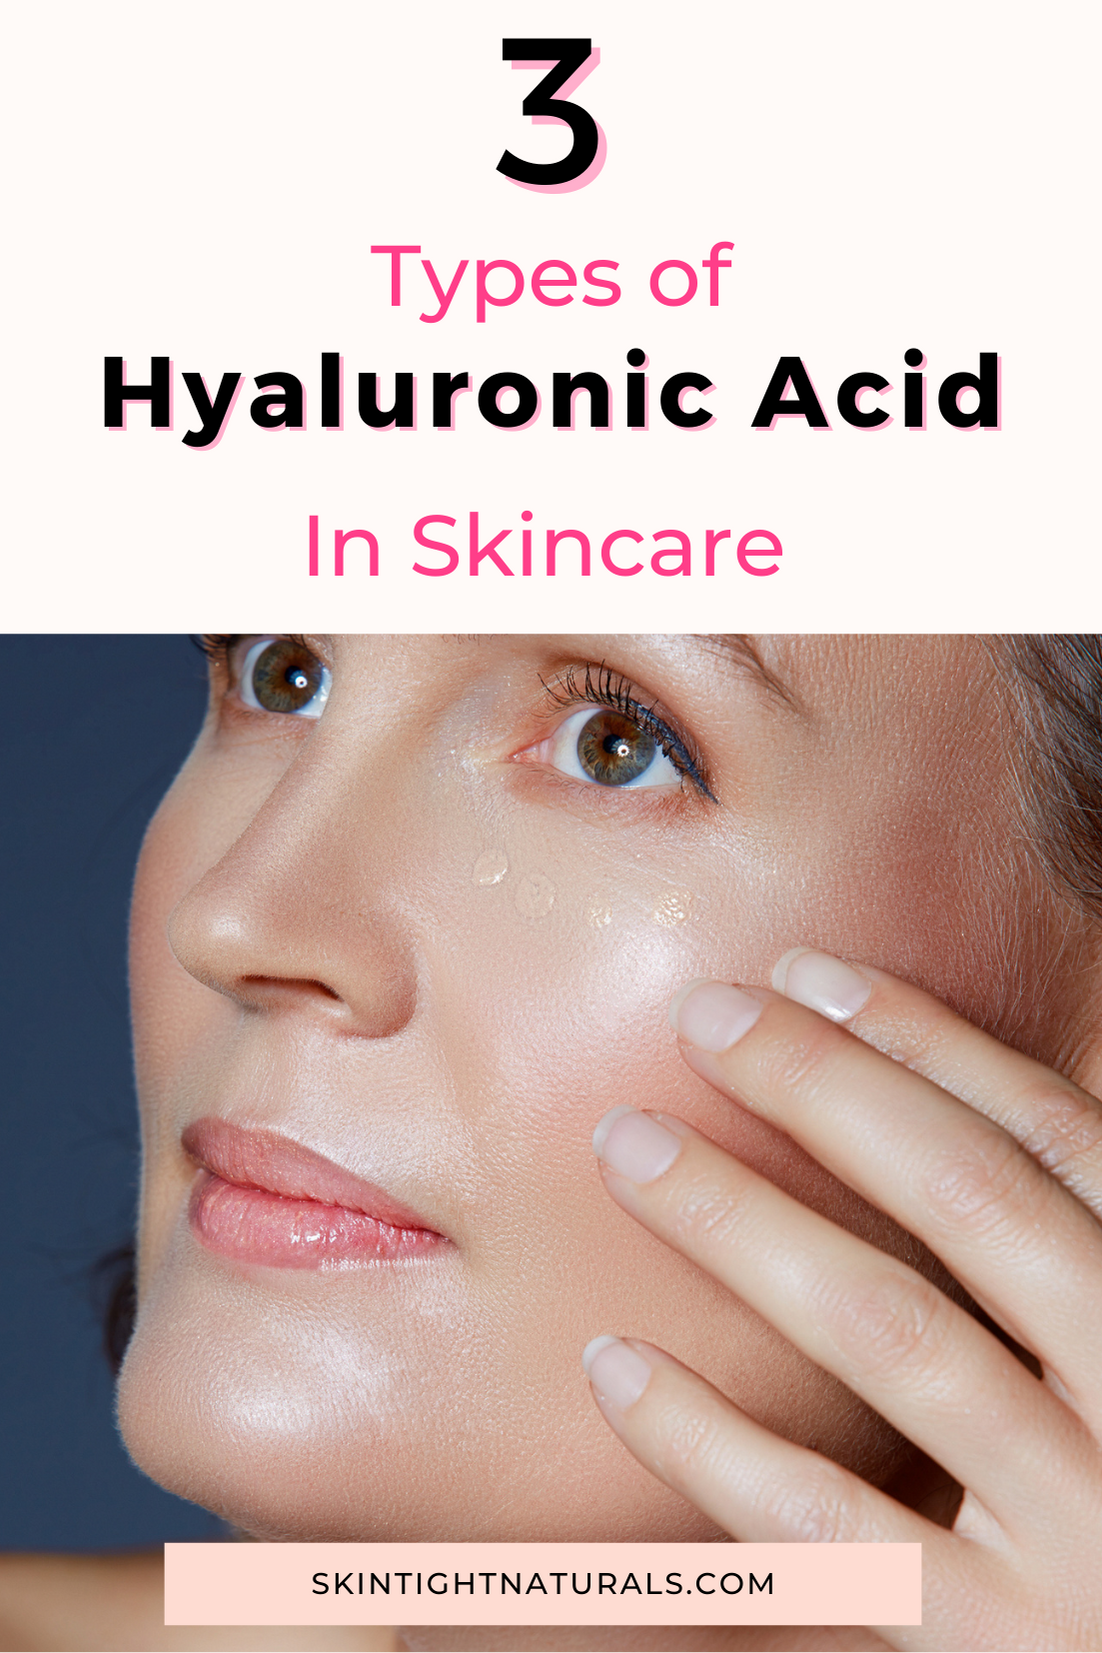 3 Types of Hyaluronic Acid Used In Skincare